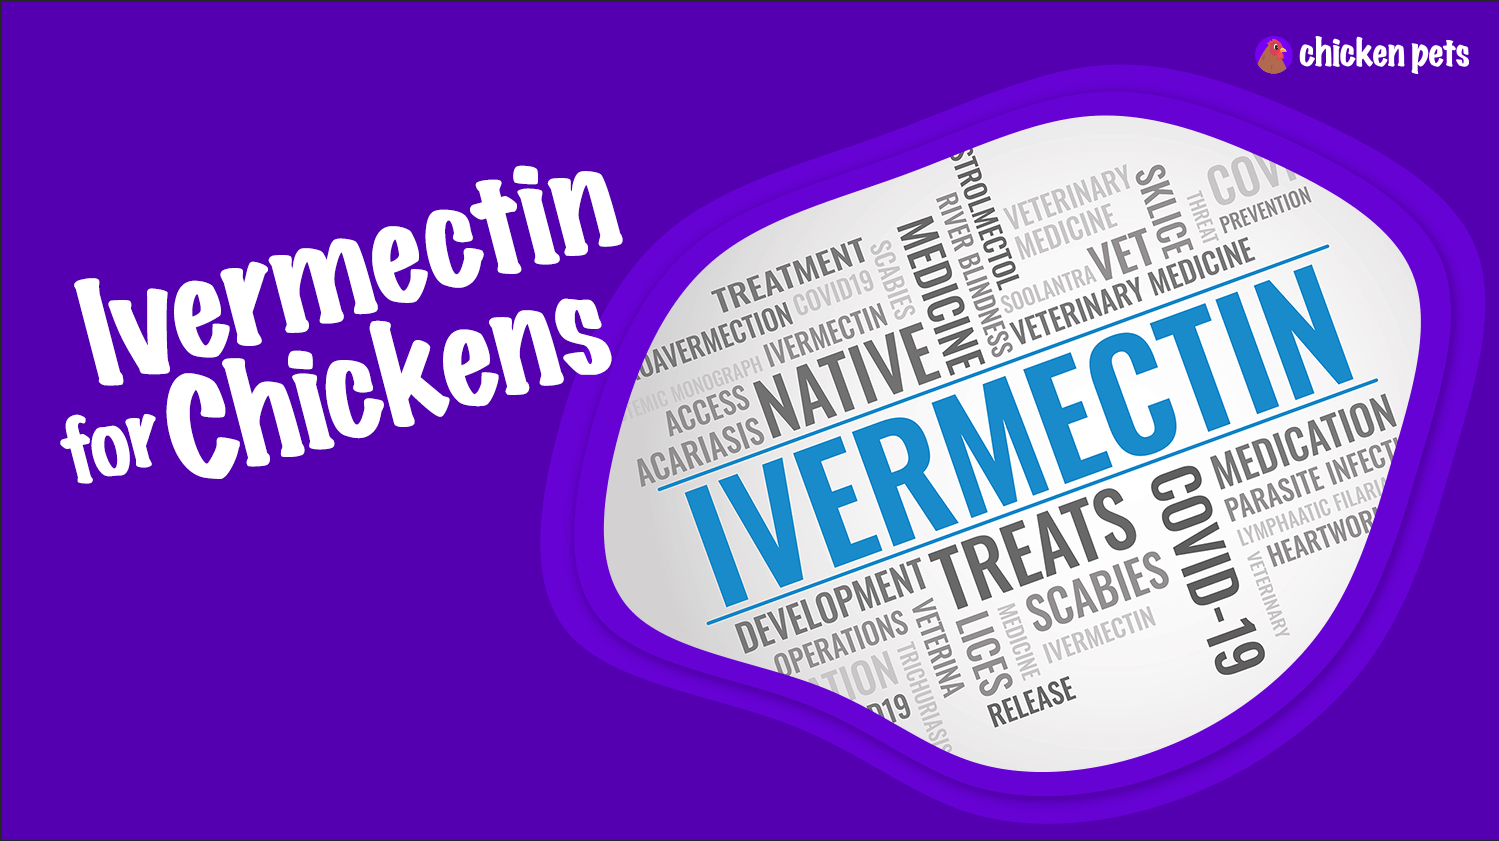 Ivermectin for Chickens or Poultry